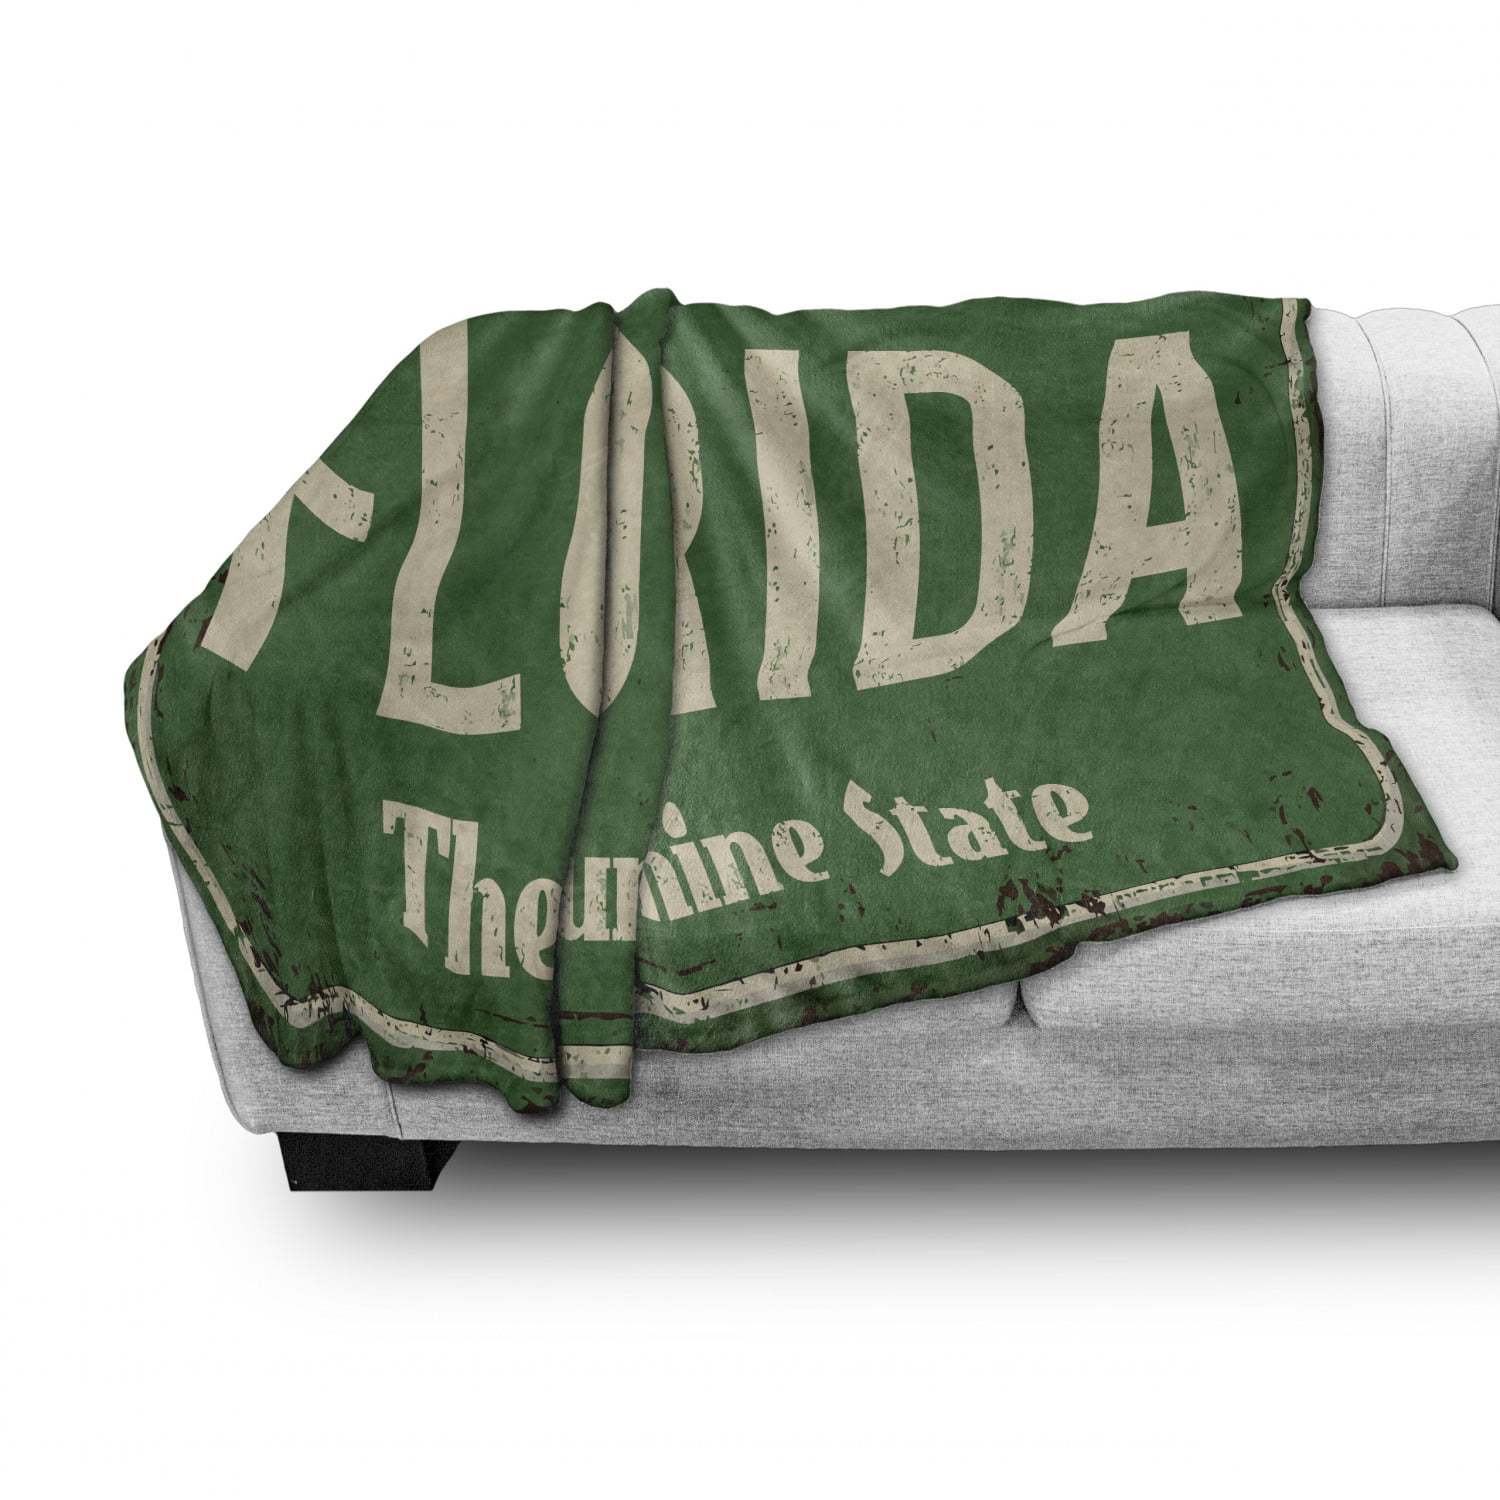 Cozy Plush for Indoor and Outdoor Use Welcome to Florida Old and Rusty Graphic Sign Design The Sunshine State Ambesonne Florida Soft Flannel Fleece Throw Blanket 70 x 90 Fern Green and Beige